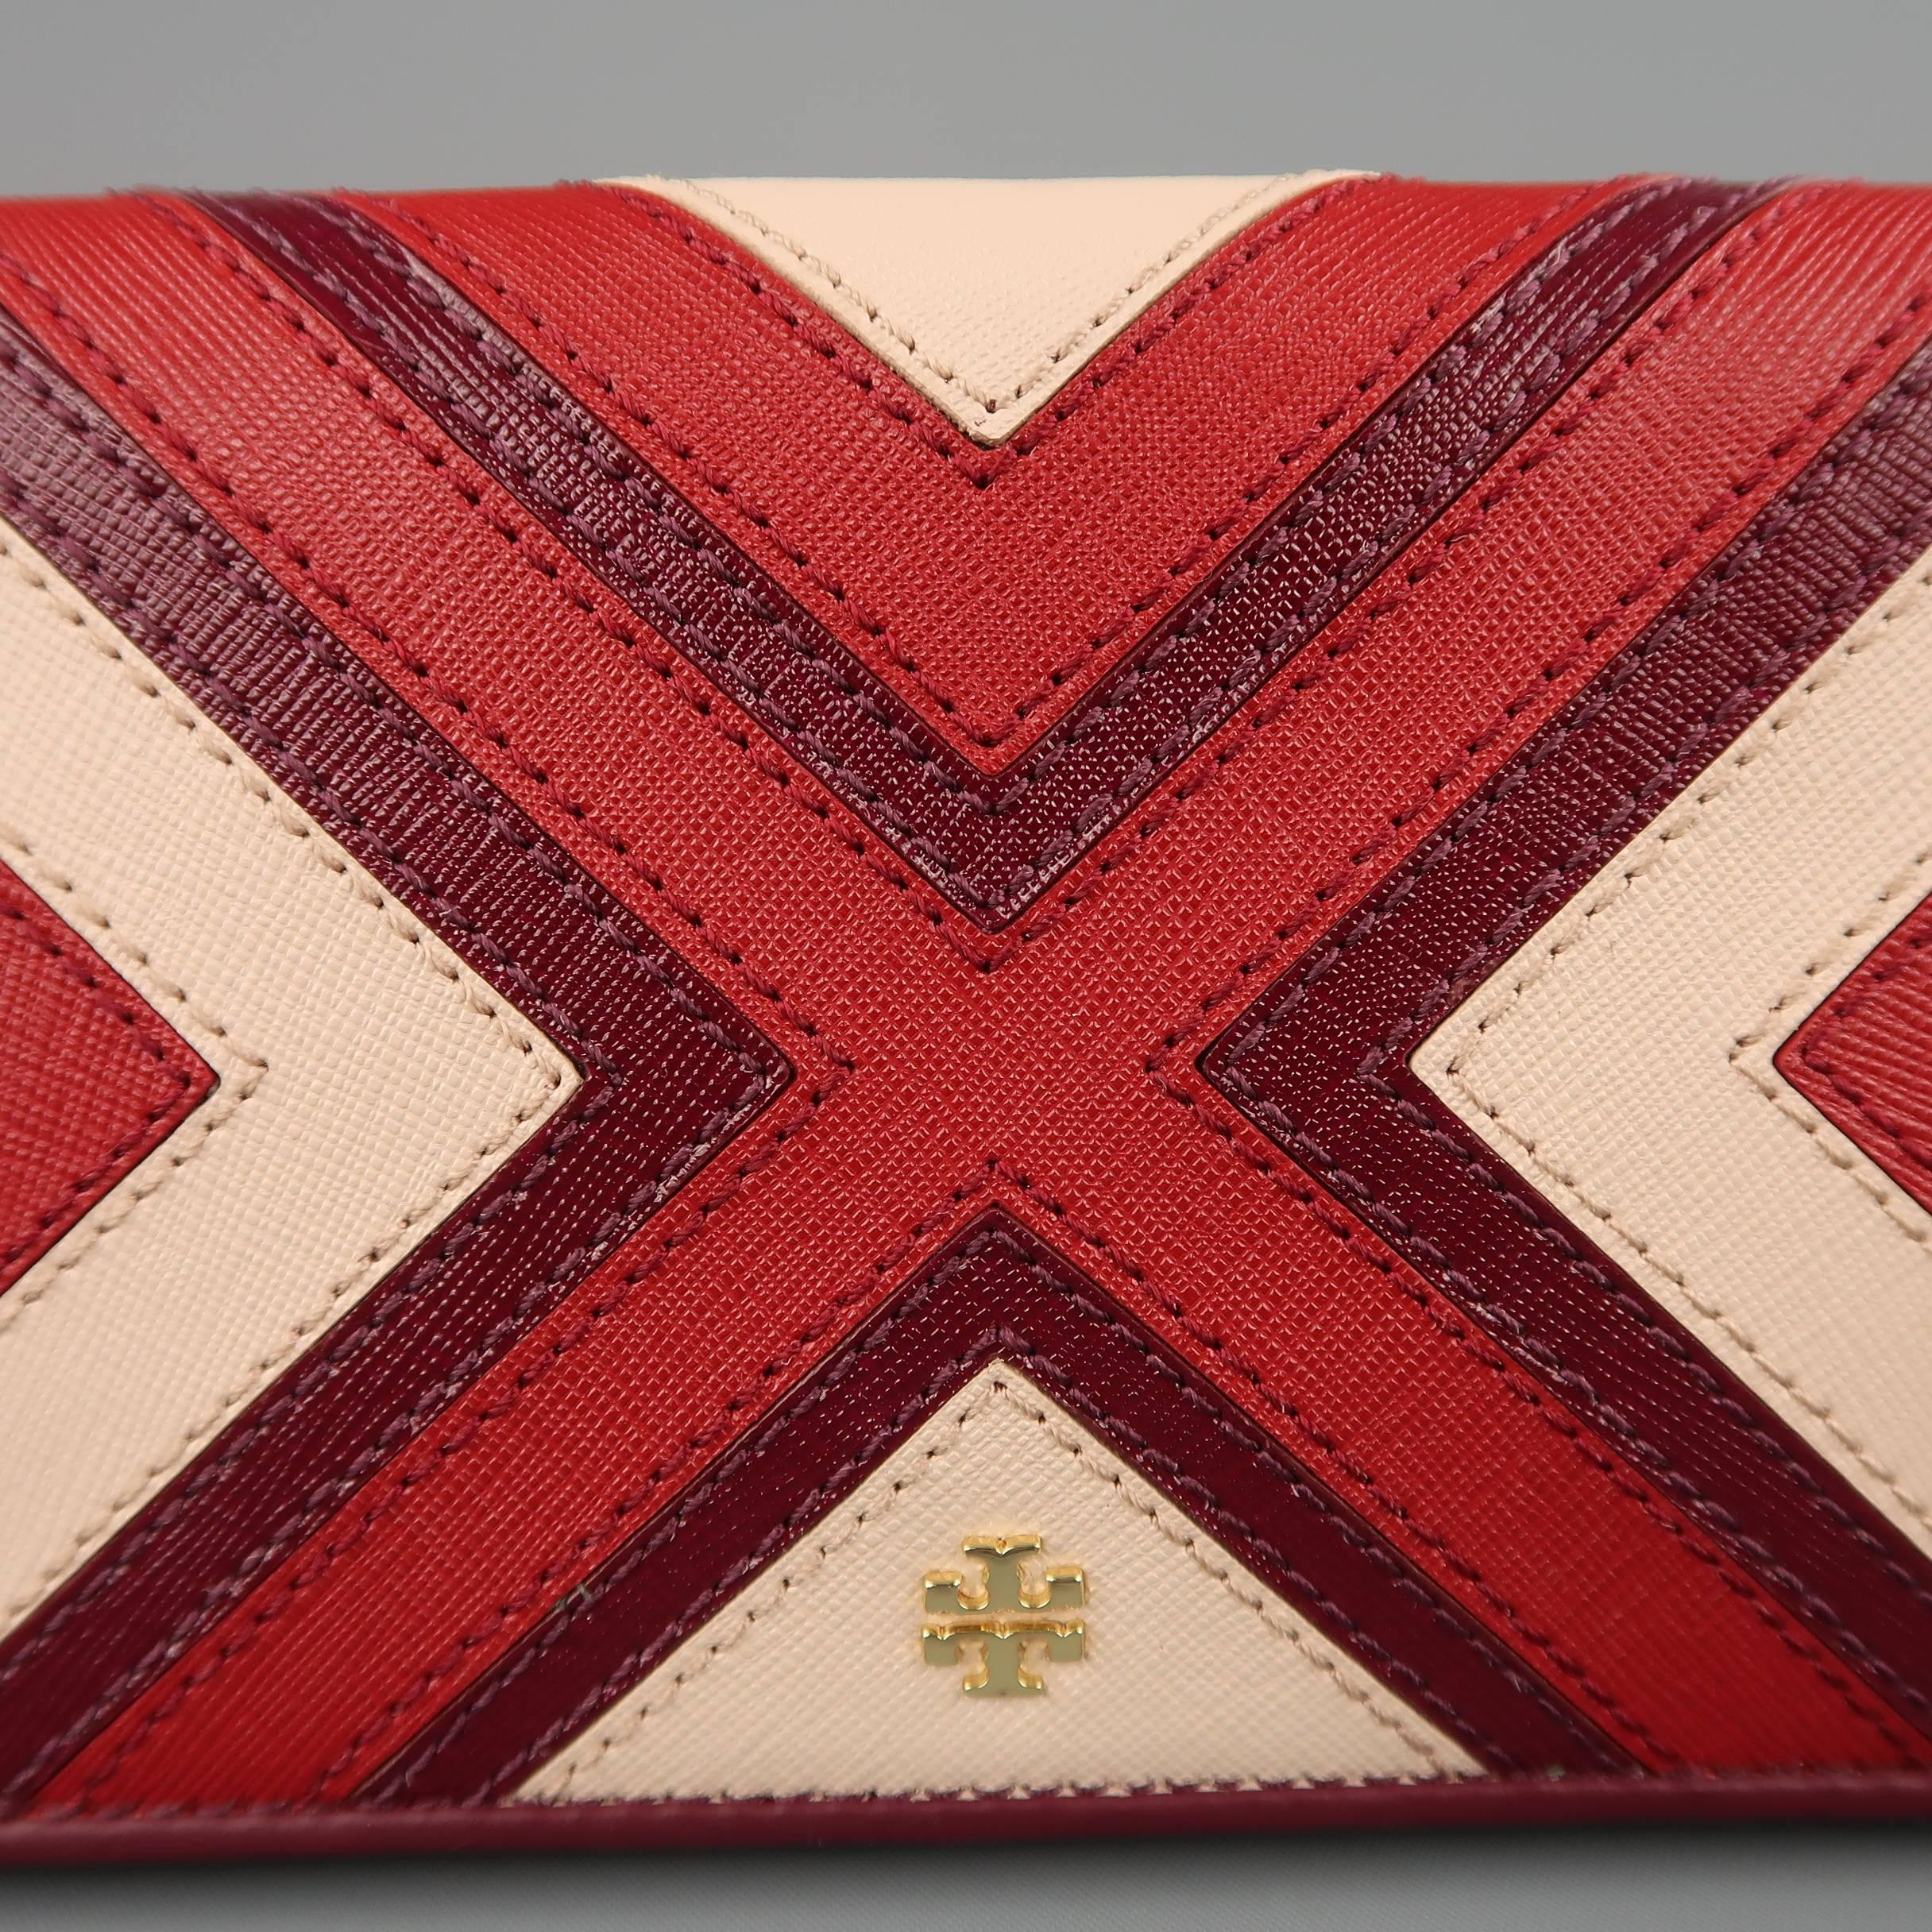 TORY BURCH wallet comes in red, plum, and pink patchwork pattern leather with a zip closure and internal compartment storage.
 
New with tags.
 
Measurements:
 

    Length: 7.5 in.
    Width: 1 in.
    Height: 4 in.
